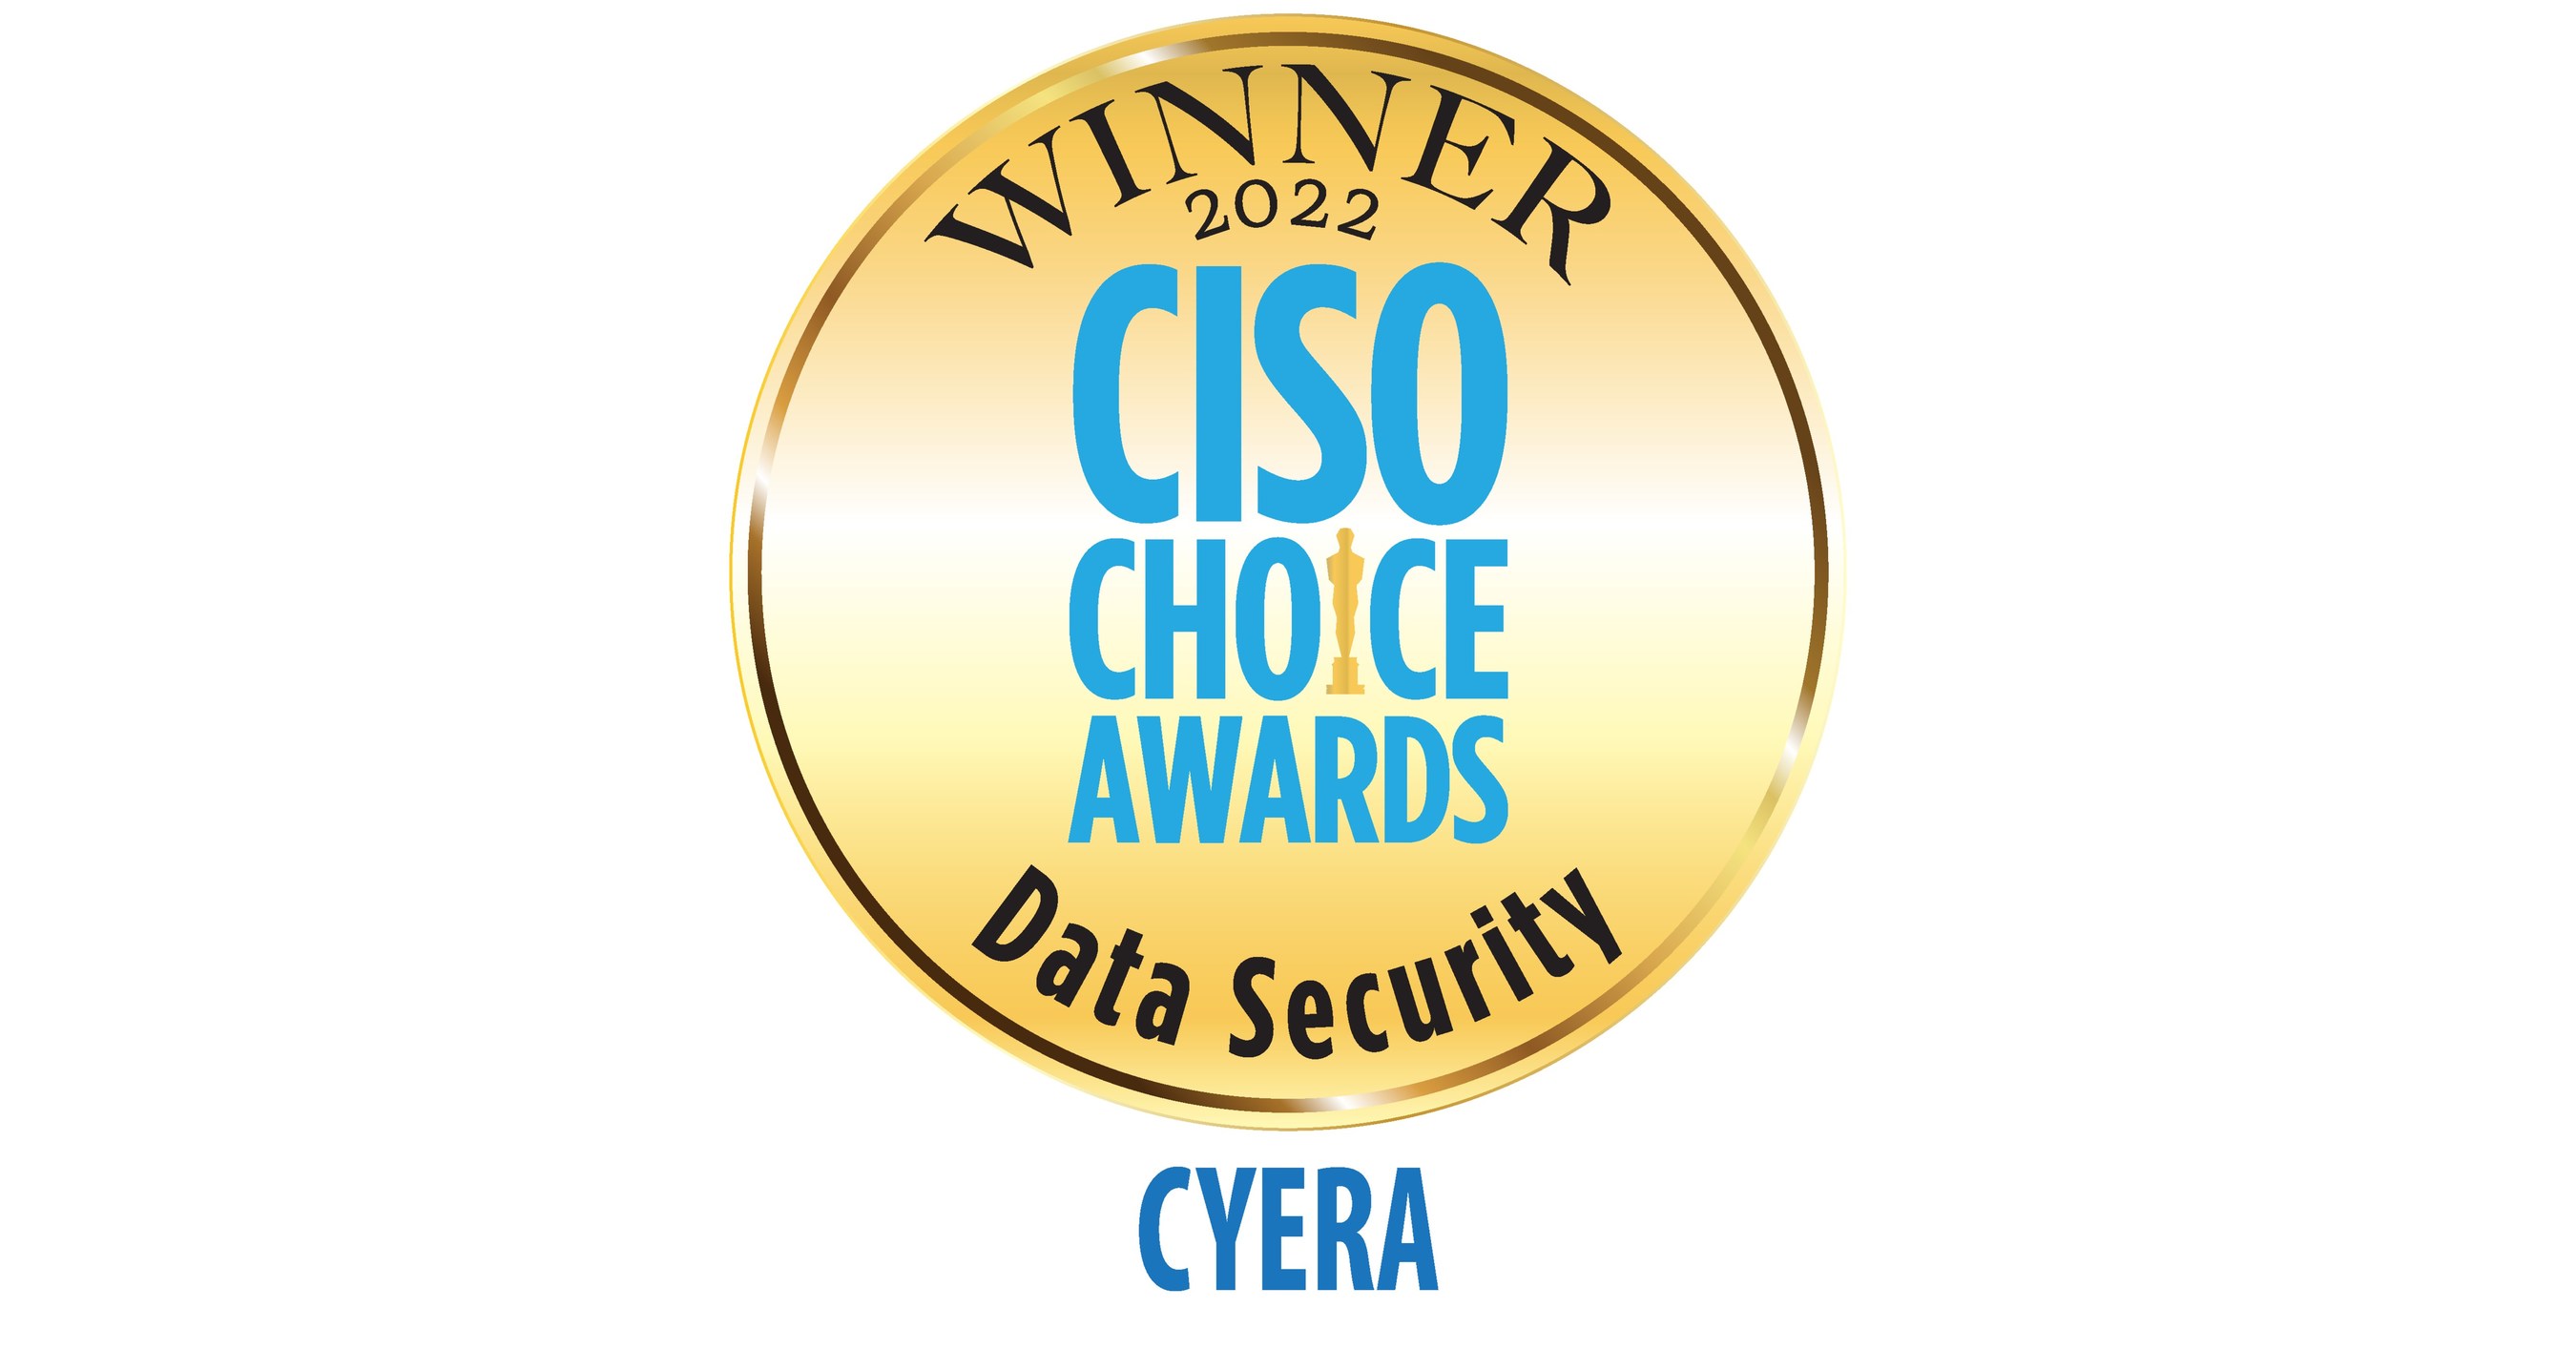 Cyera Named Best Data Security Solution at 2022 CISO Choice Awards